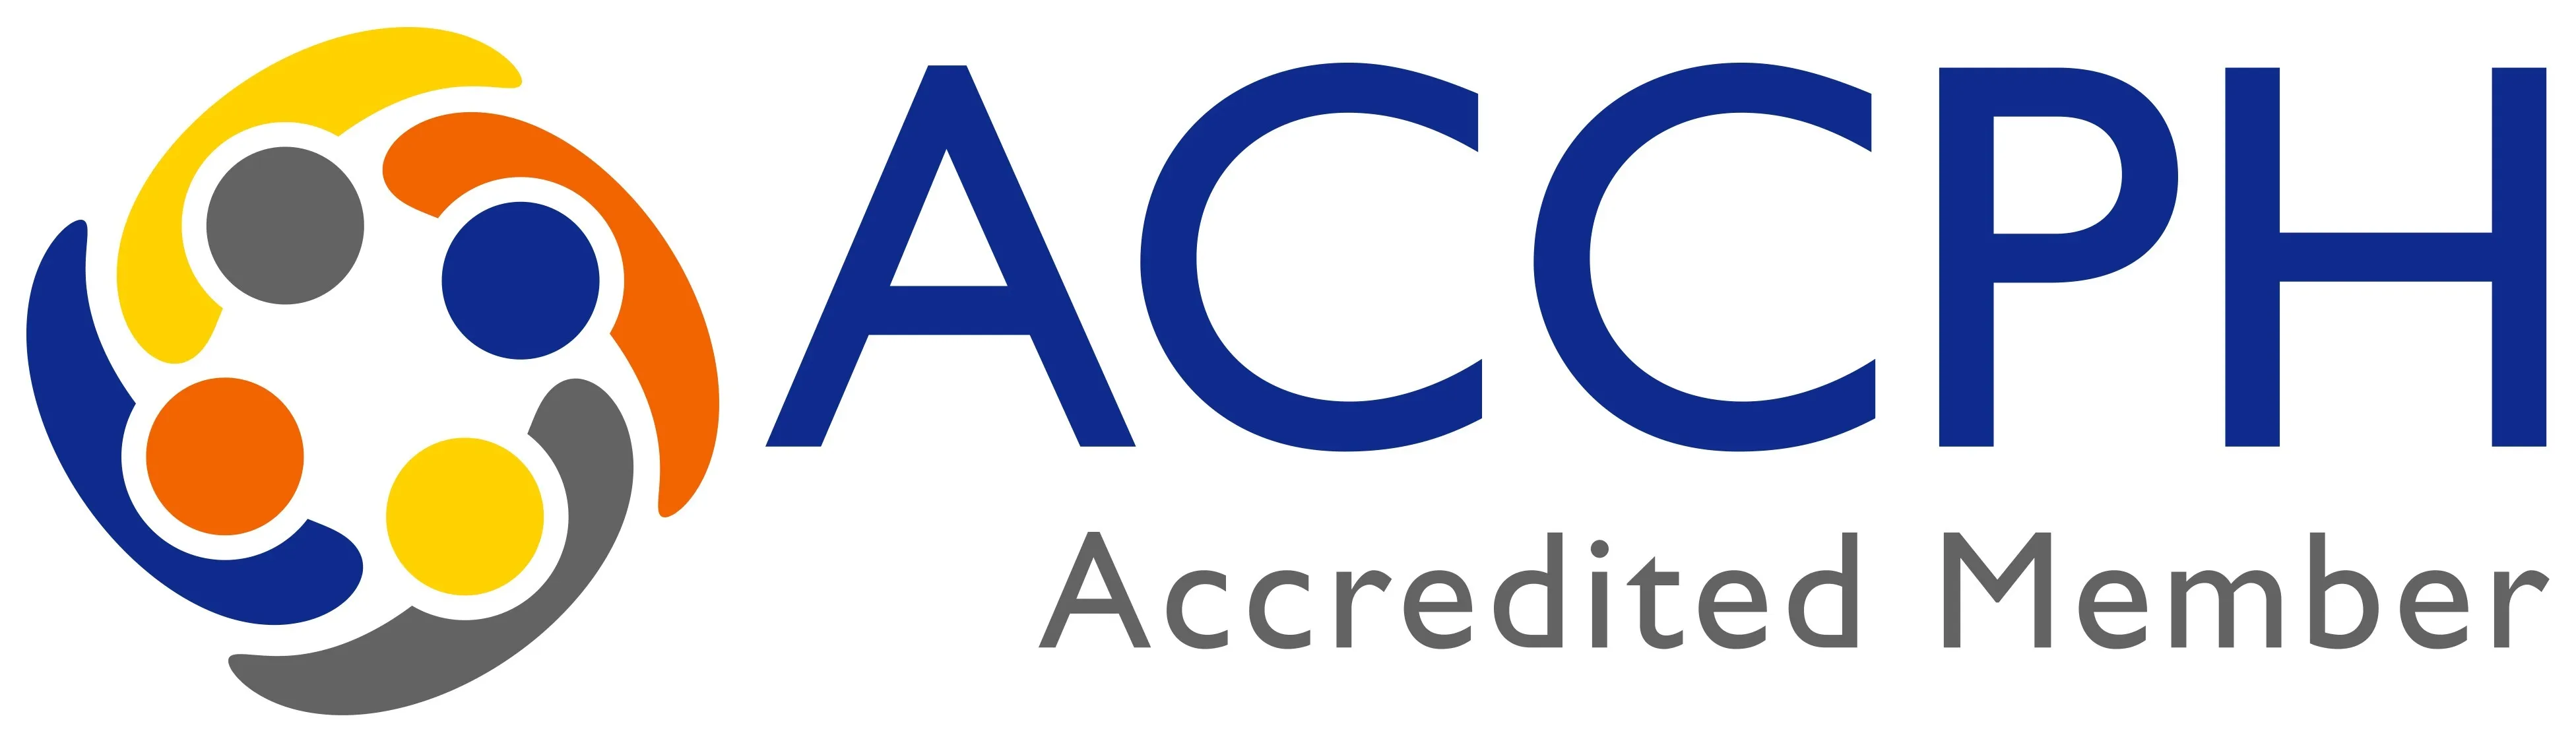 accredited counsellors coaches psychotherapists and hypnotherapists logo